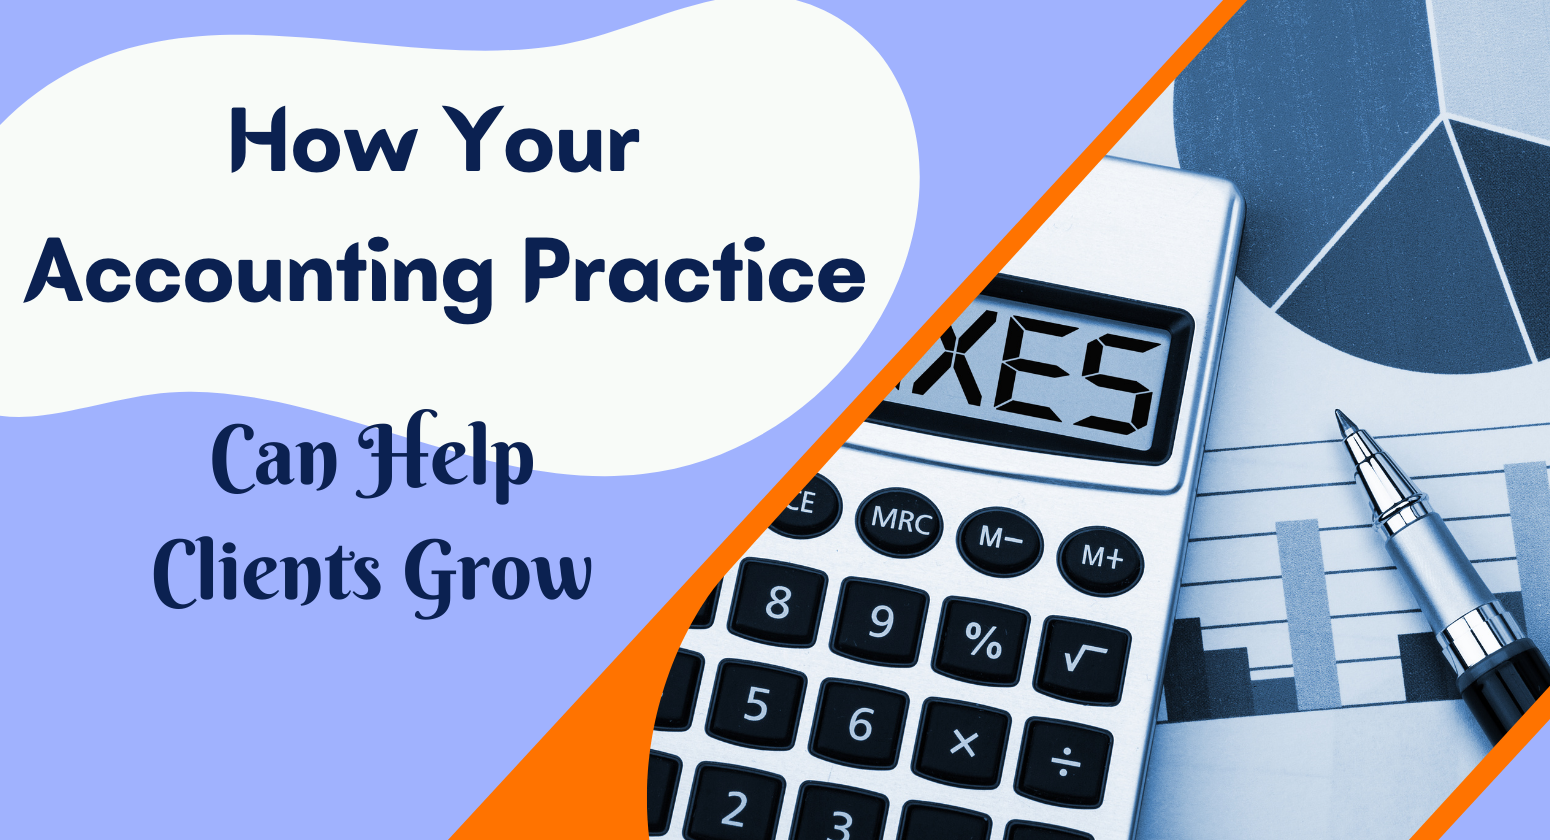 How Your Accounting Practice Can Help Clients Grow